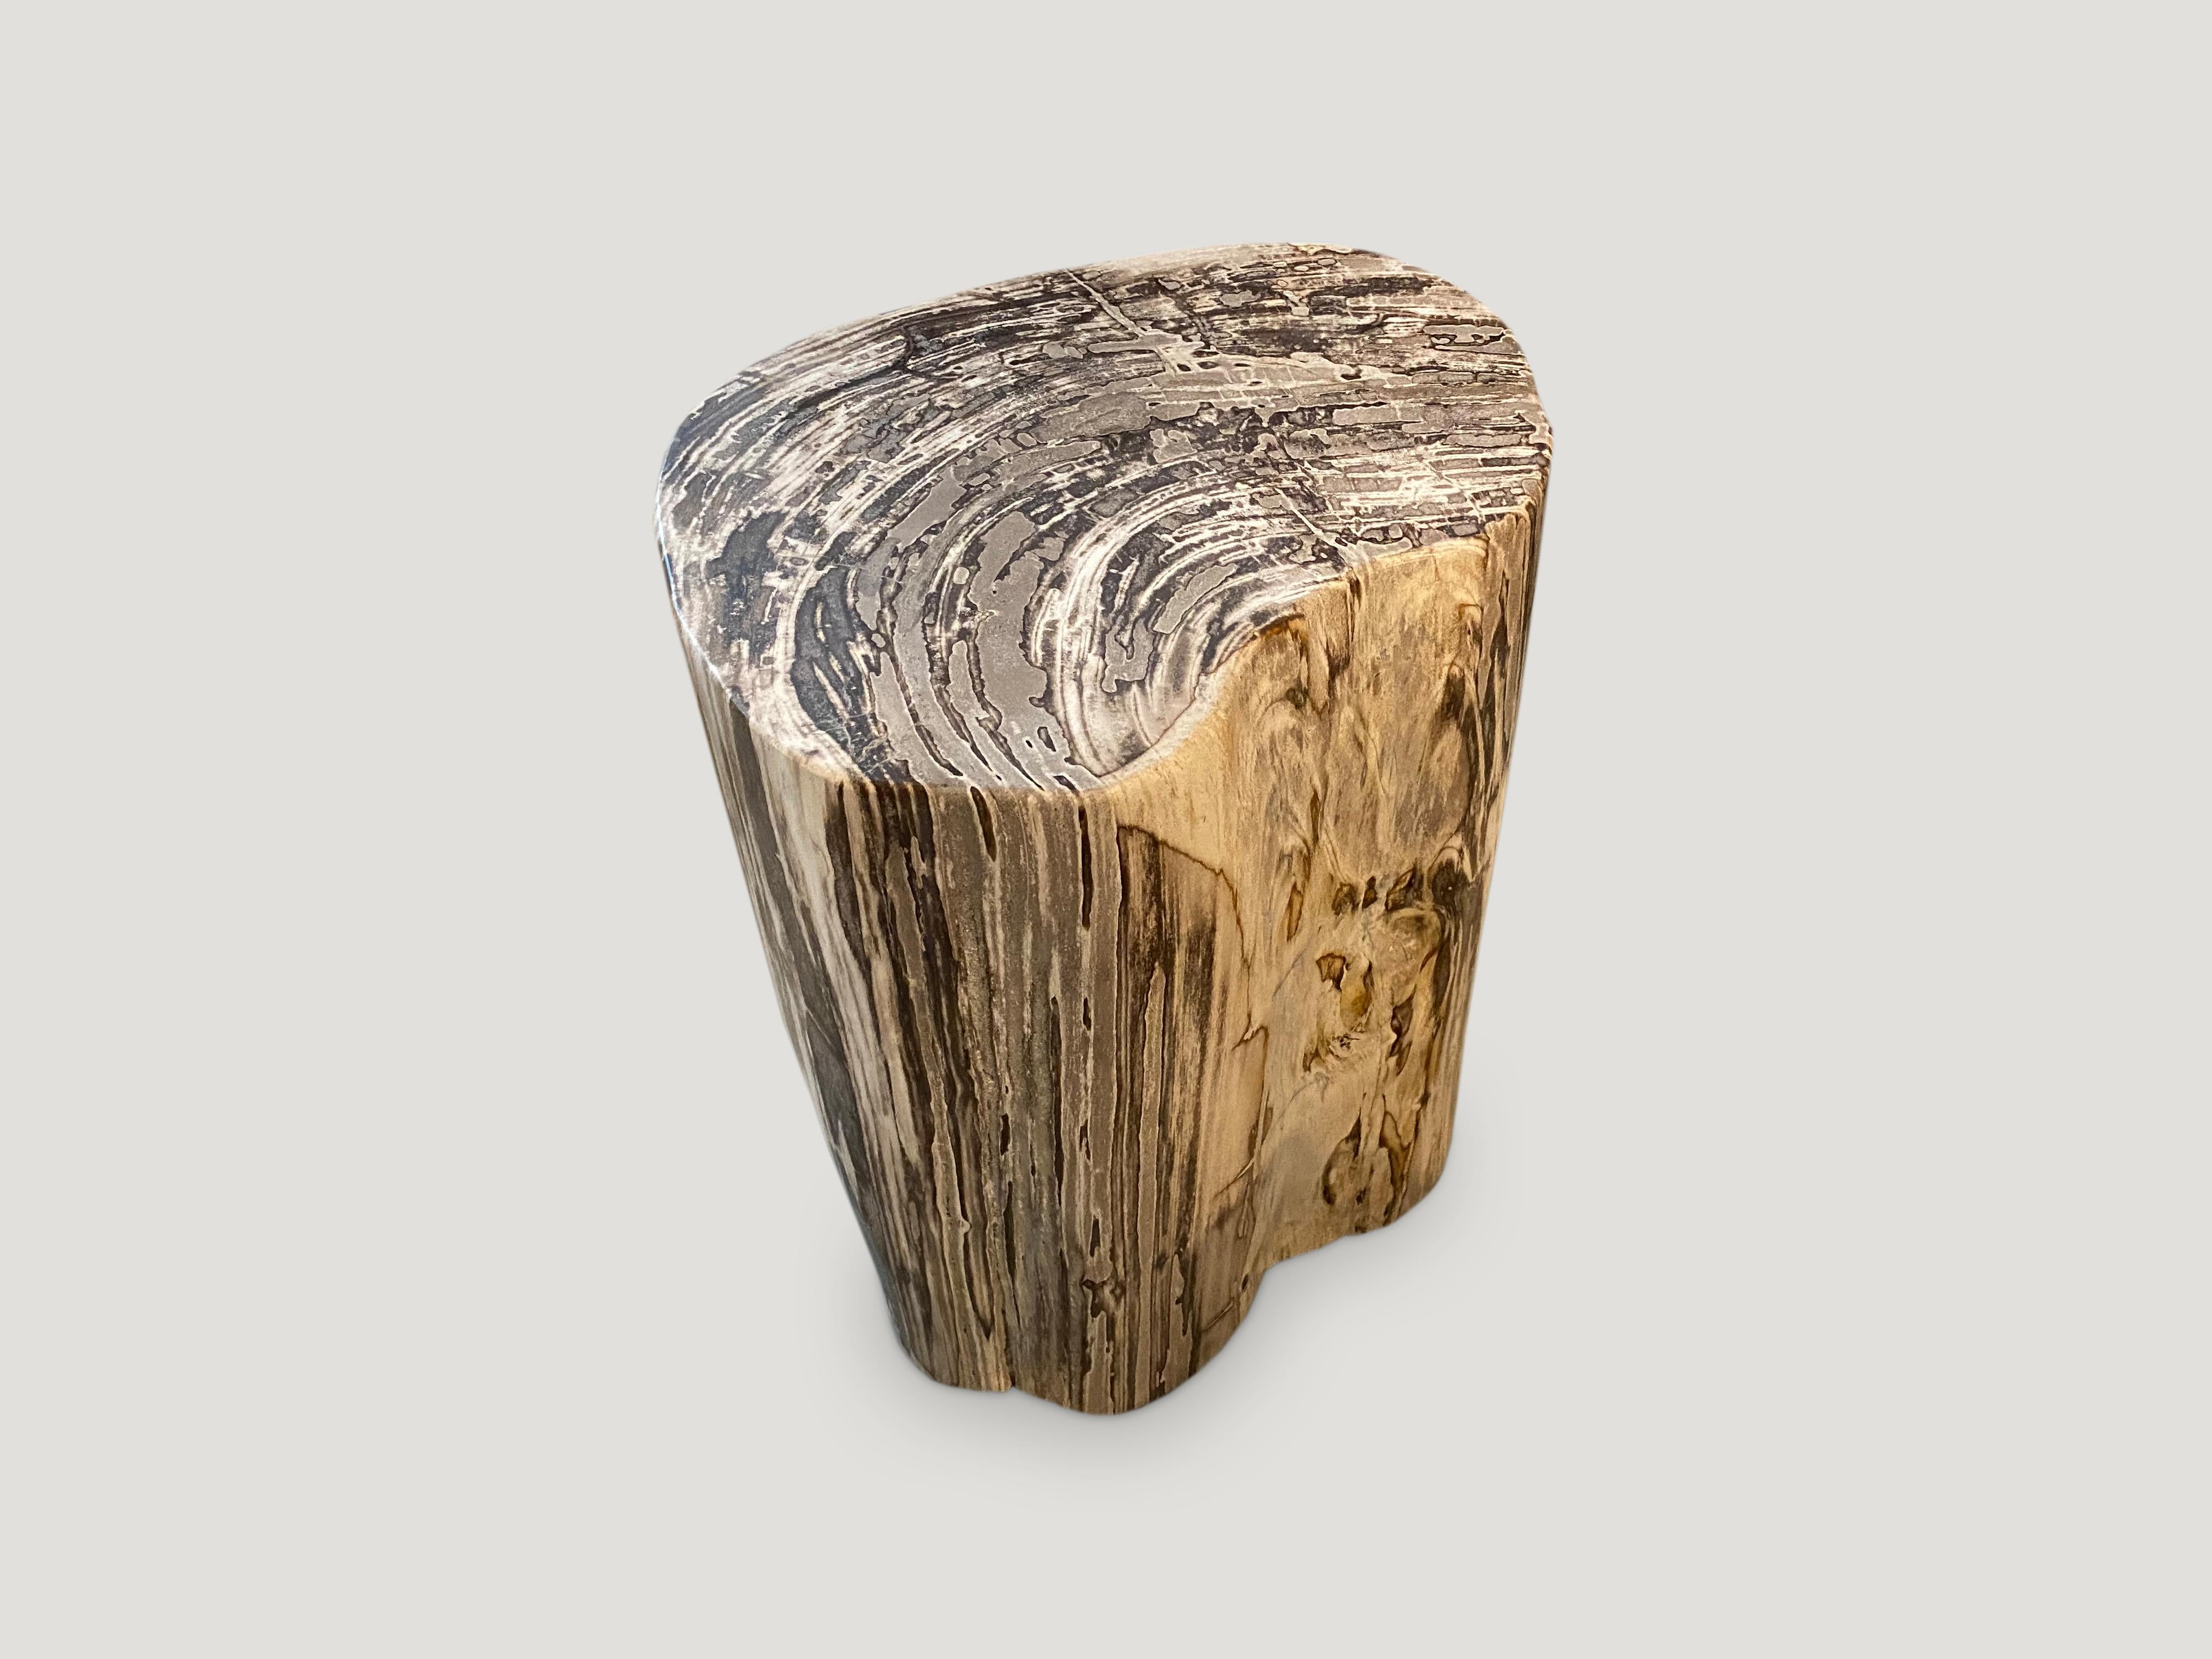 Impressive super smooth high quality petrified wood side table. It’s fascinating how Mother Nature produces these exquisite 40 million year old petrified teak logs with such contrasting colors and natural patterns throughout. Modern yet with so much